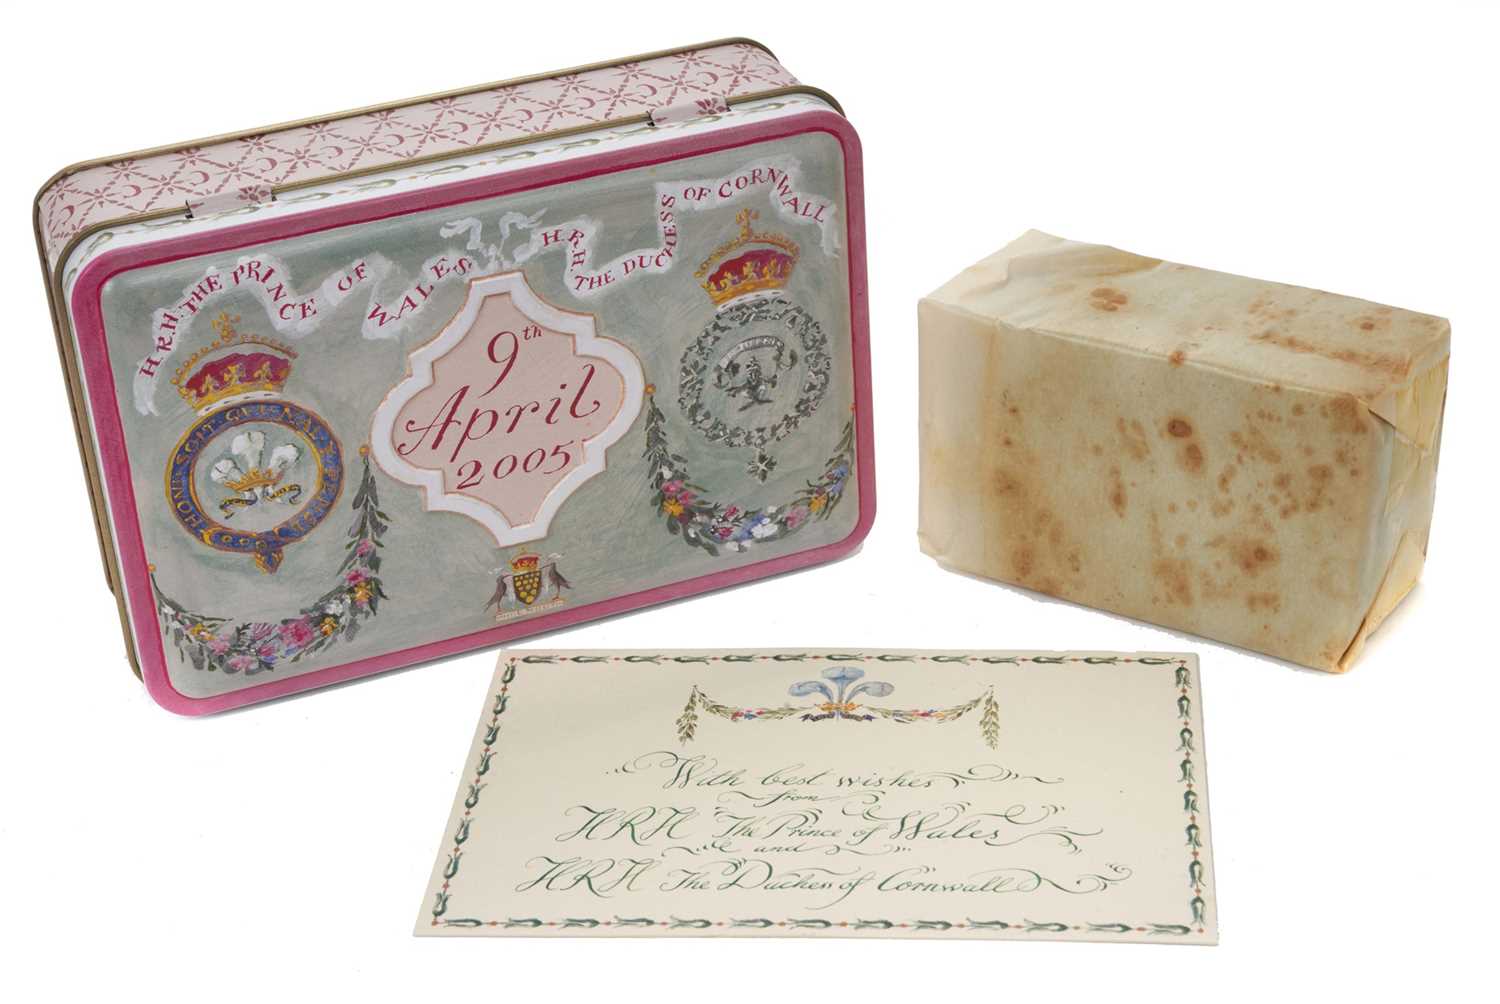 Lot 38 - The Wedding of T.R.H. The Prince of Wales to The Duchess of Cornwall (now T.M King Charles III and Queen Camilla) 9th April 2005, piece of Wedding cake in original presentation tin with card and o...